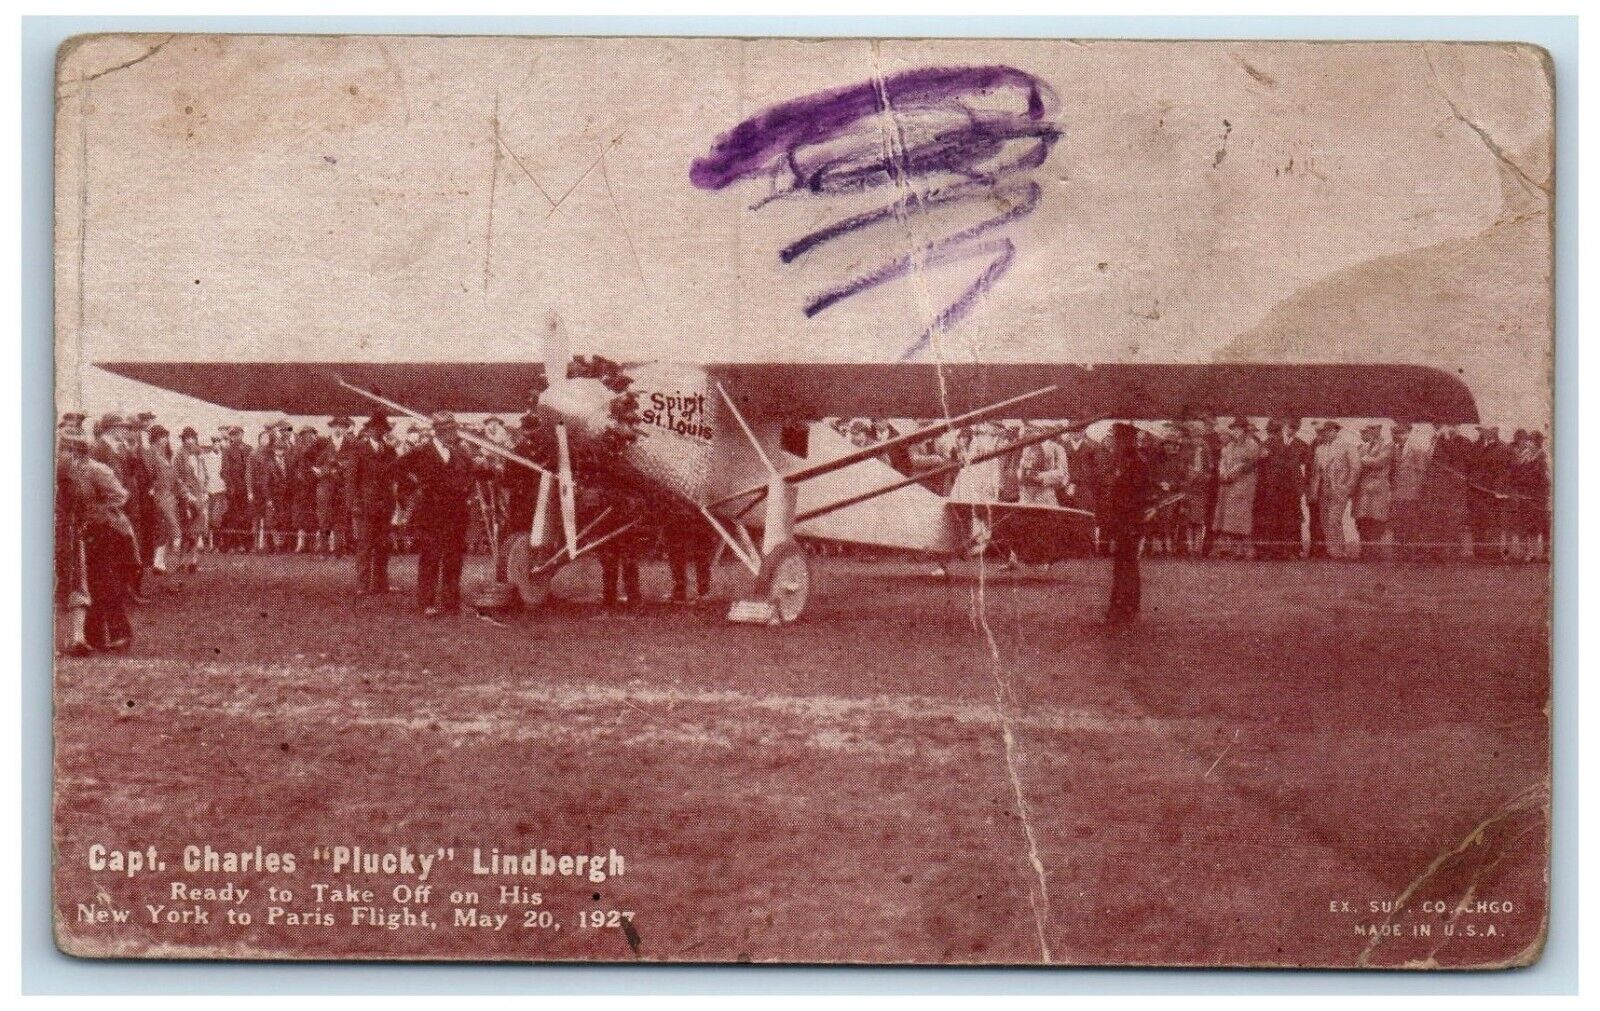 Capt. Charles Plucky Lindbergh Ready To Take Off Airplane Exhibit Arcade Card